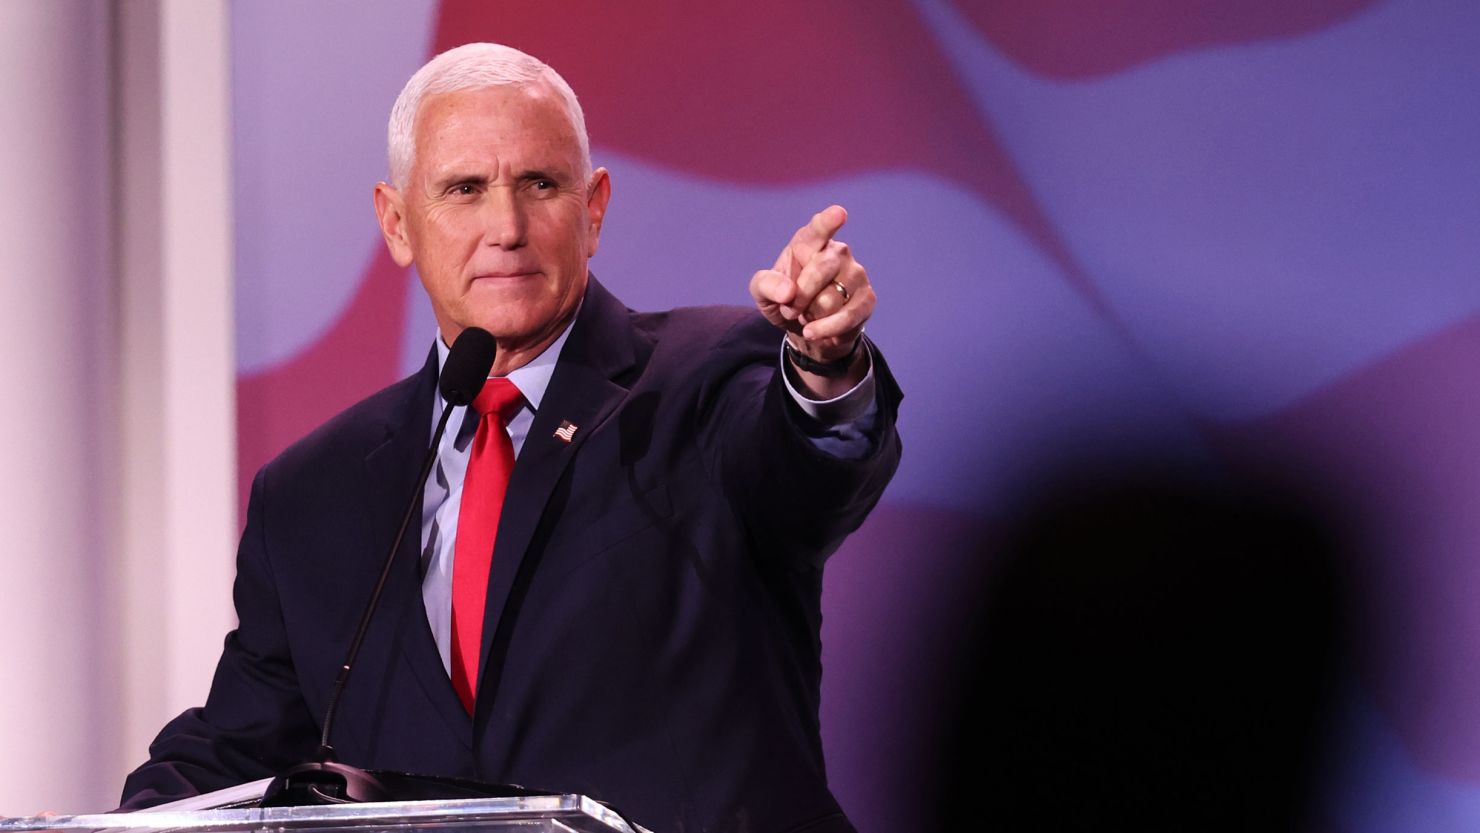 Former Vice President Mike Pence speaks to guests at the Republican Jewish Coalition Annual Leadership Meeting on November 18, 2022 in Las Vegas, Nevada.